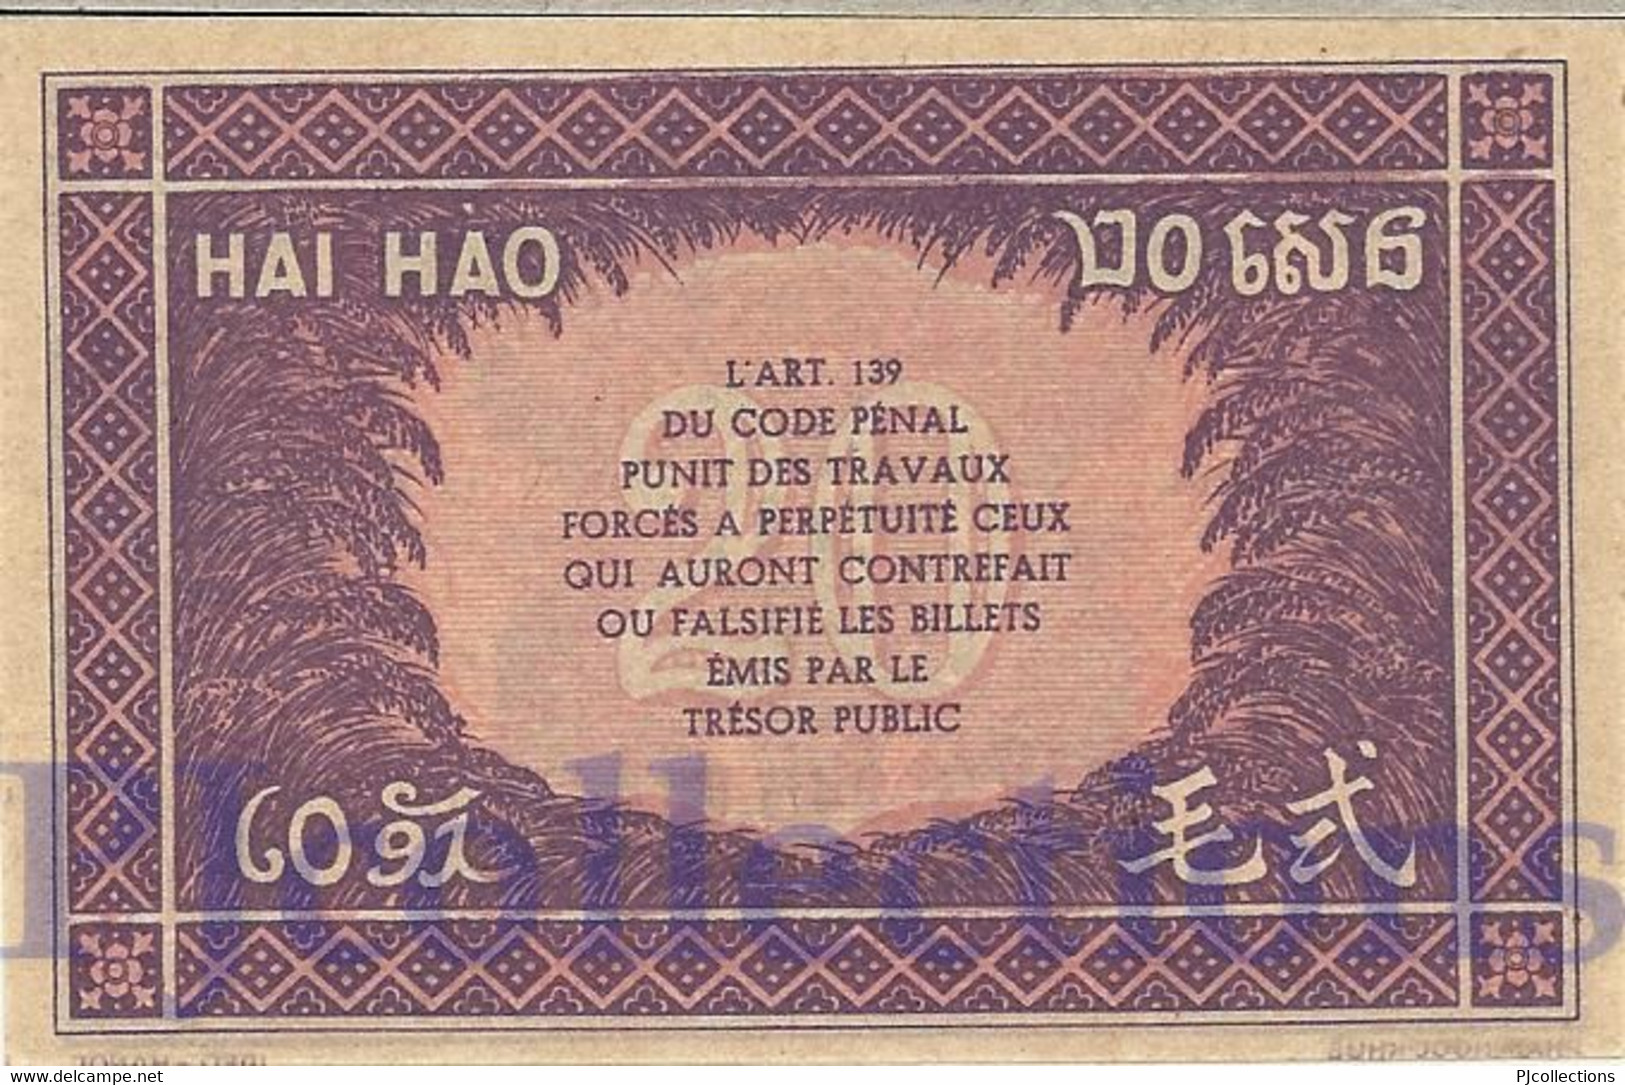 FRENCH INDOCHINA 20 CENTS 1942 PICK 90 UNC - Indochine